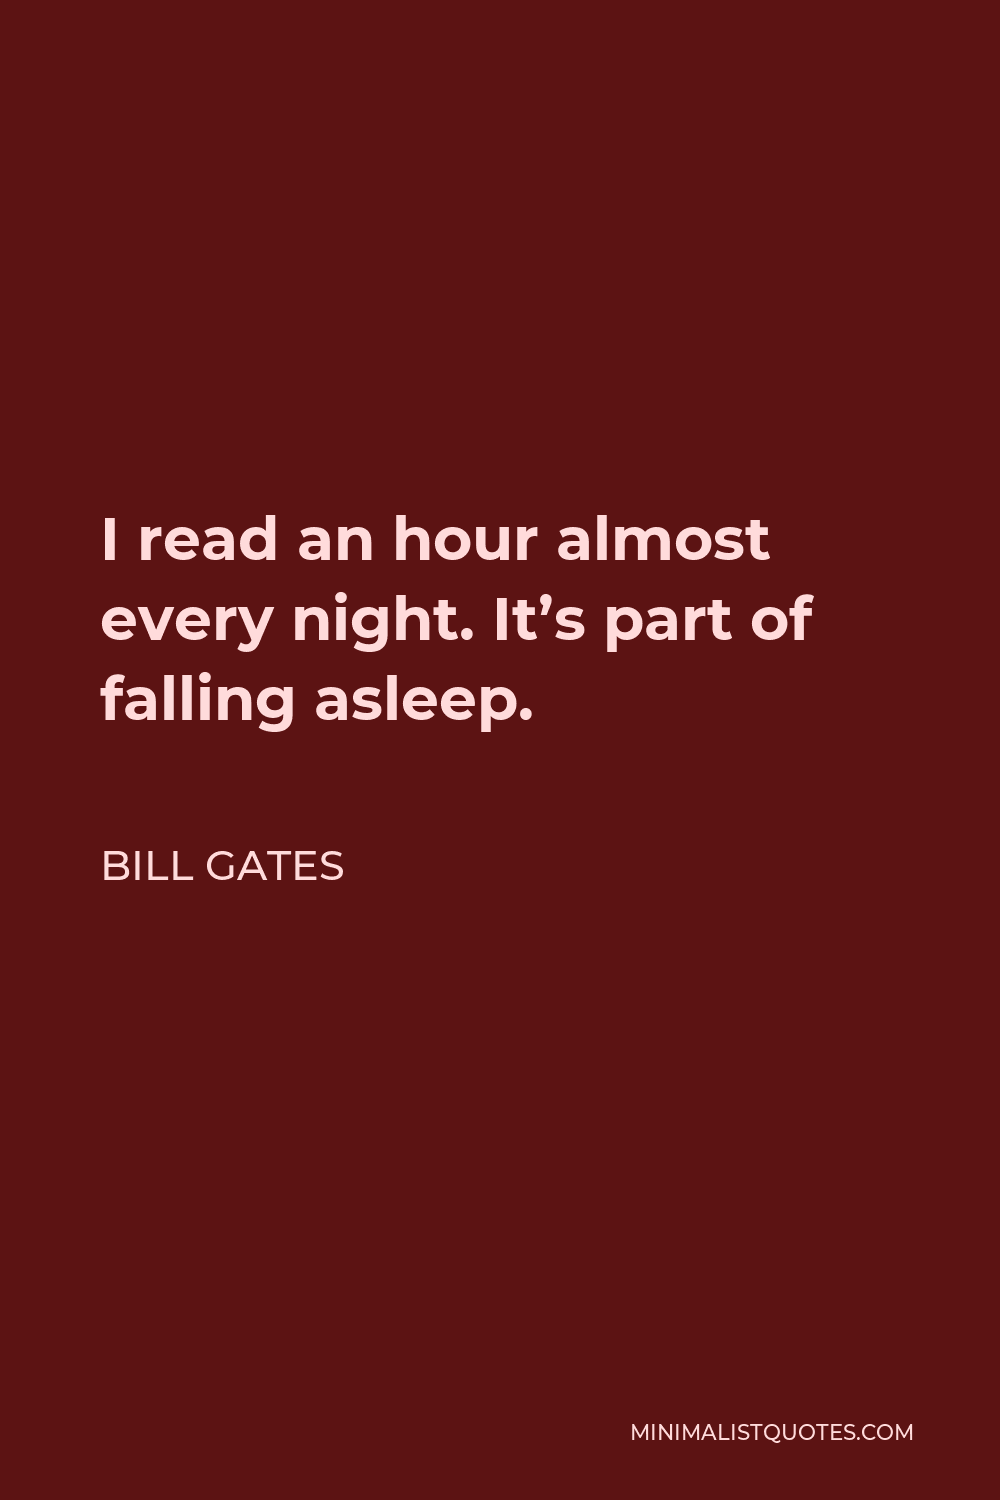 Bill Gates Quote - I read an hour almost every night. It’s part of falling asleep.